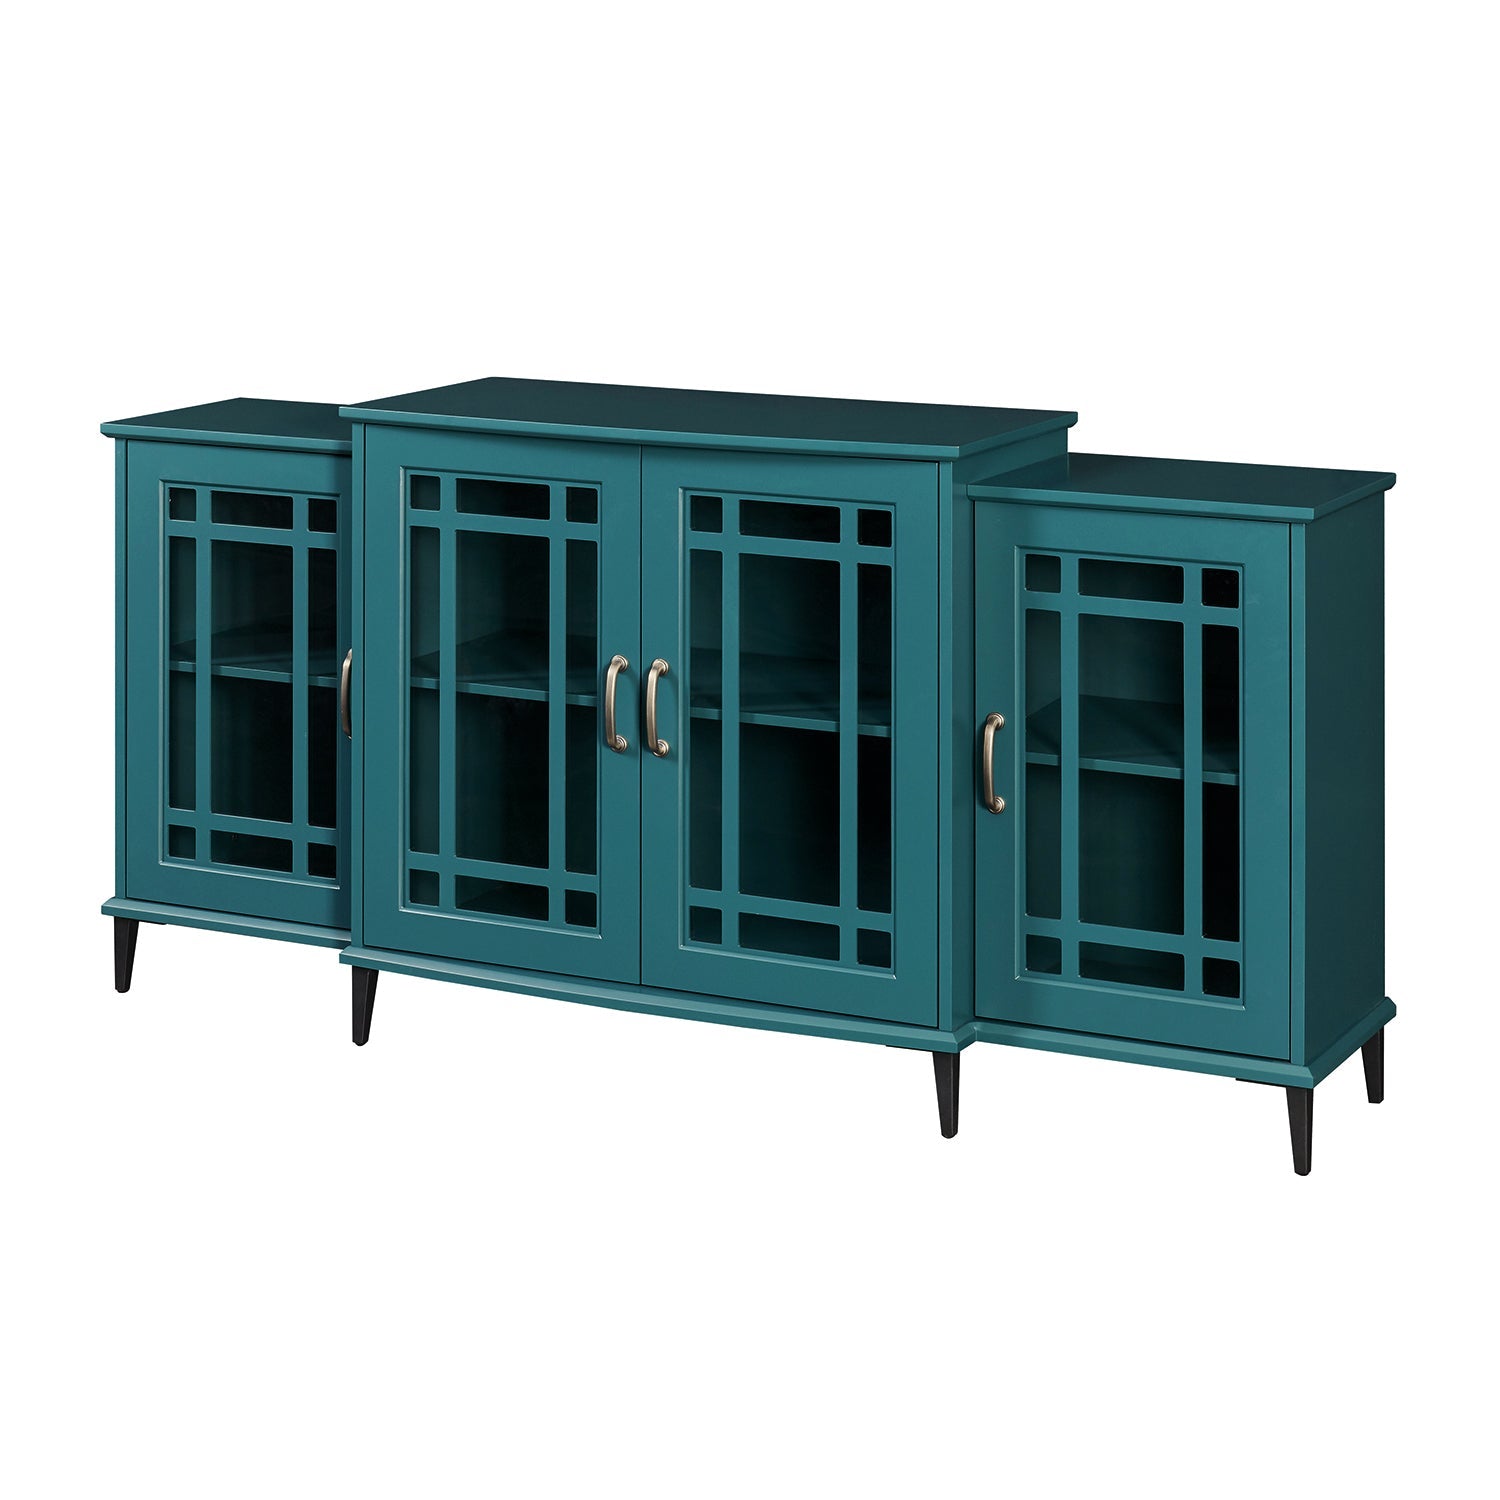 62" TV Stand Buffet Sideboard Cabinet Teal Blue